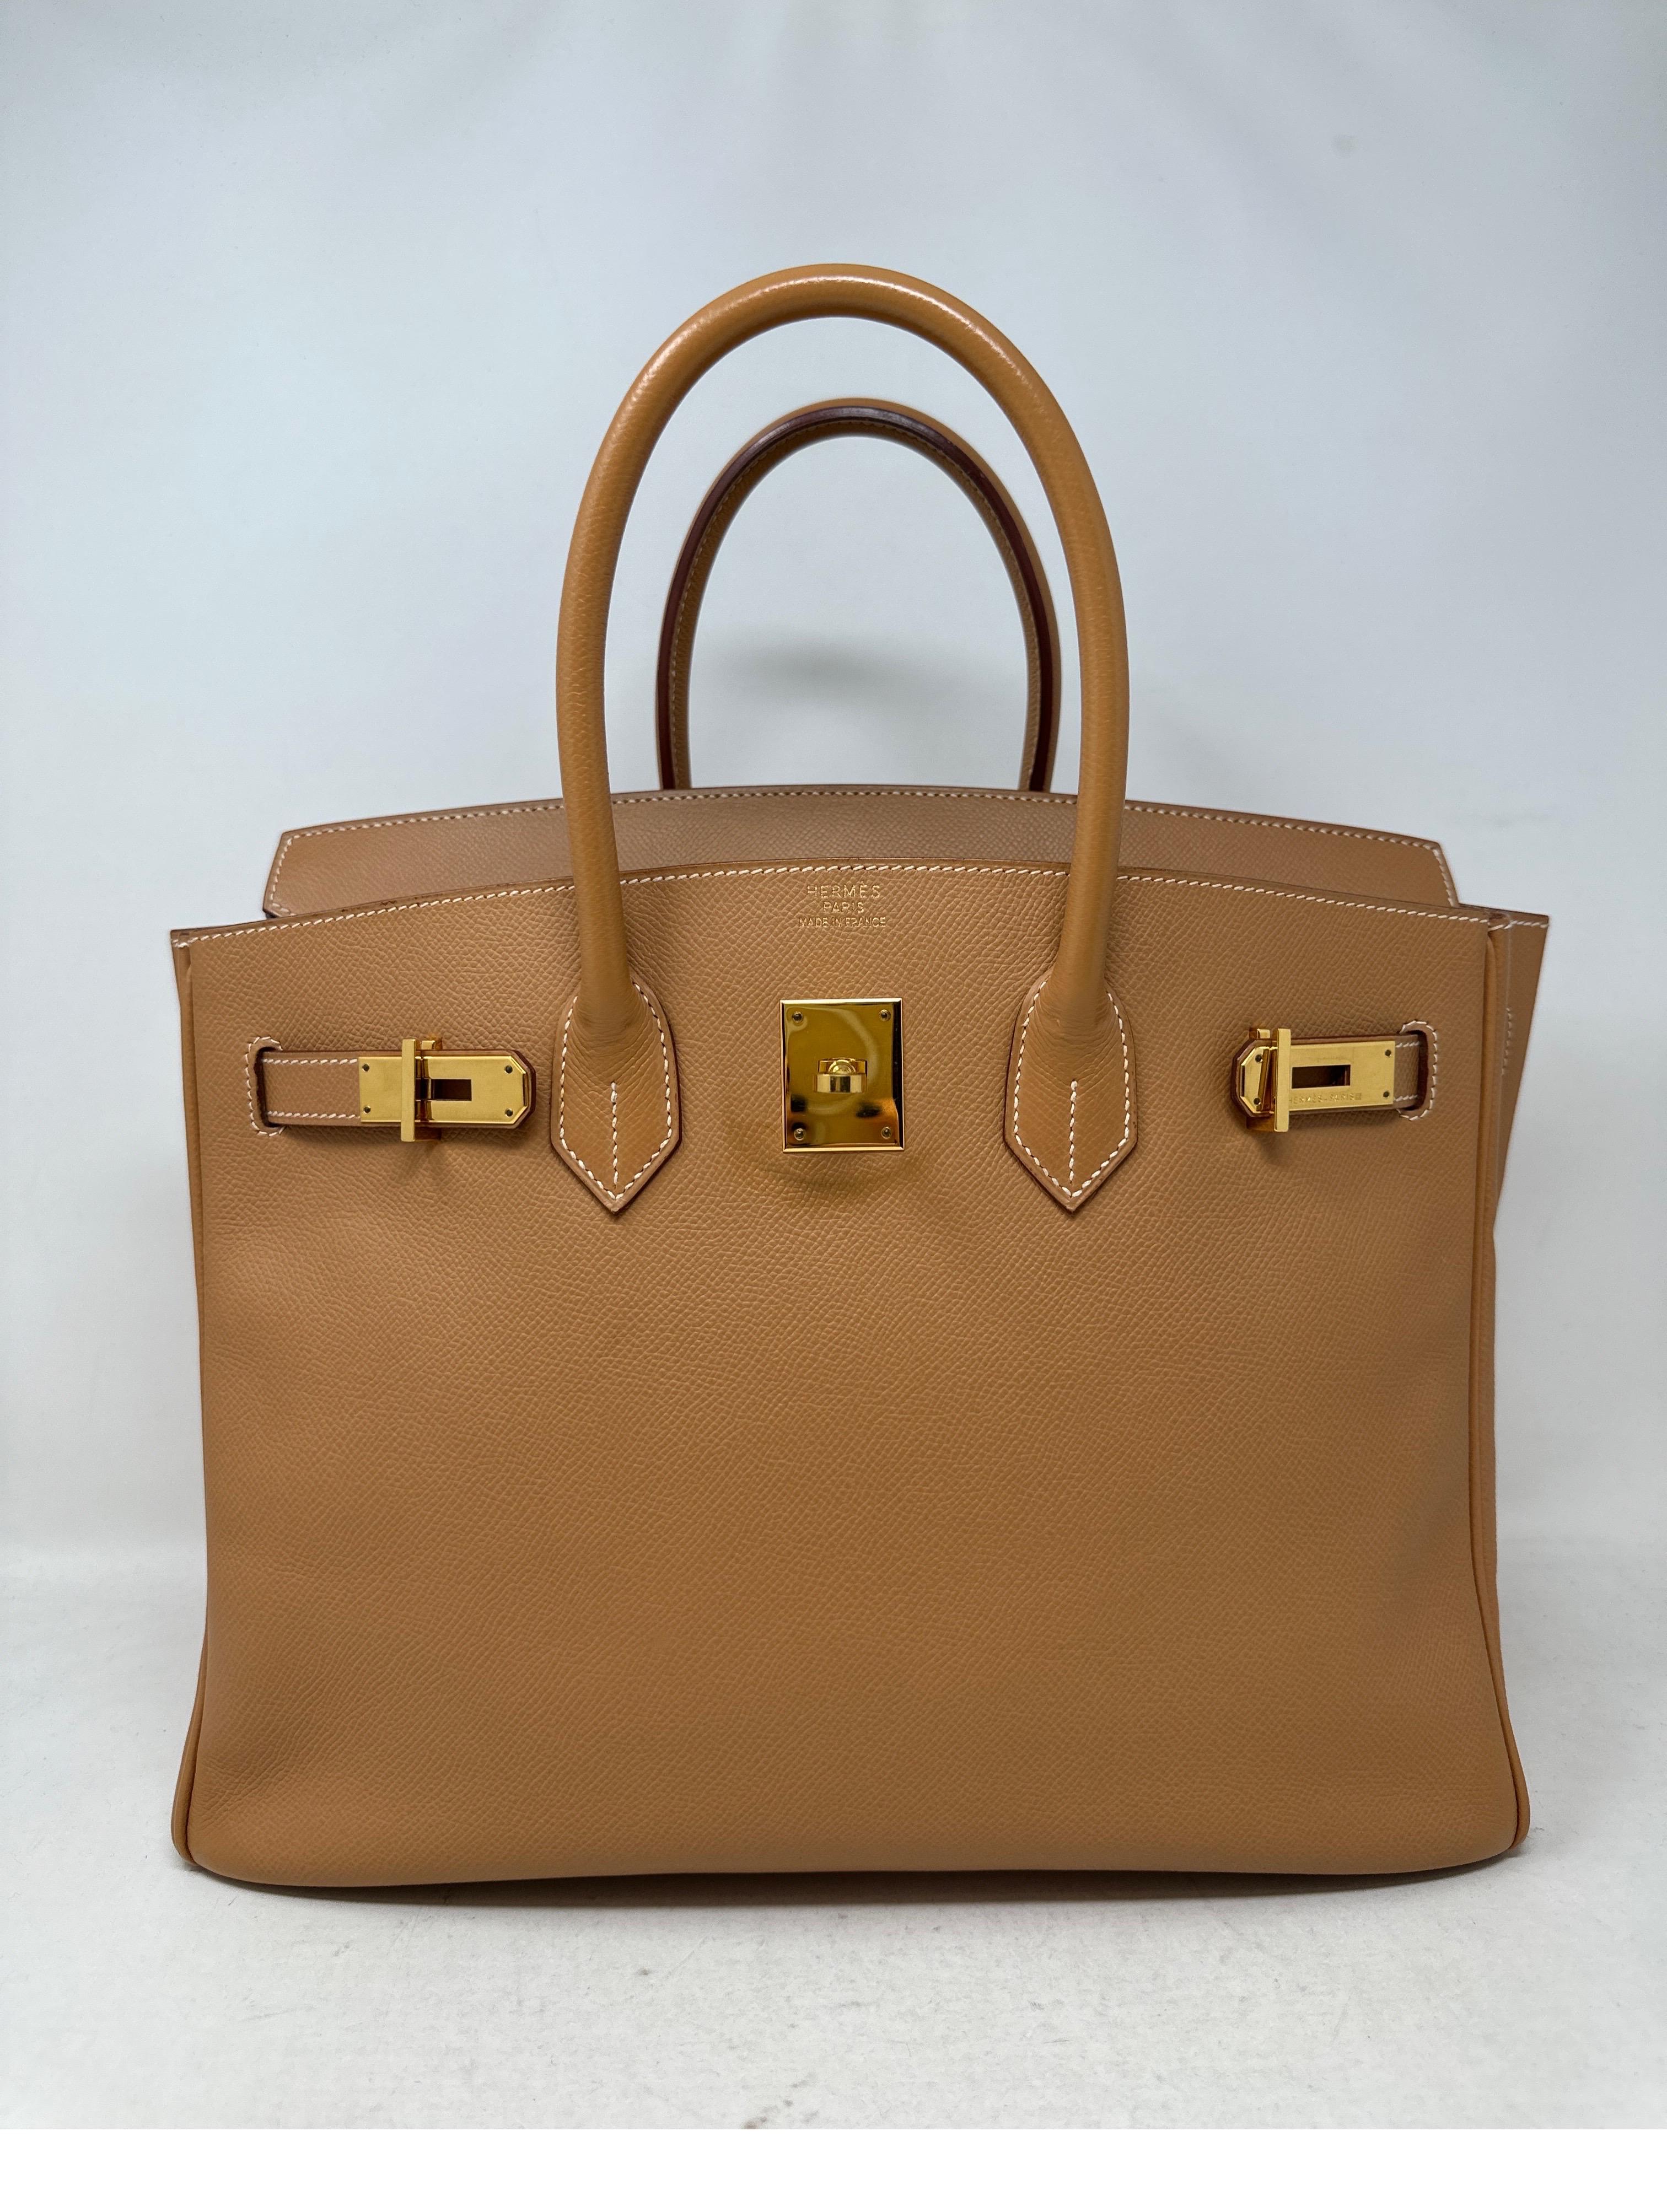 Hermes Natural Tan Birkin 35 Bag. Vintage Courcheval leather with gold hardware. Very good condition. Interior clean. Looks amazing for its age. Rare color and most wanted neutral tone. Contrast white stitching. Own a vintage Birkin in very good